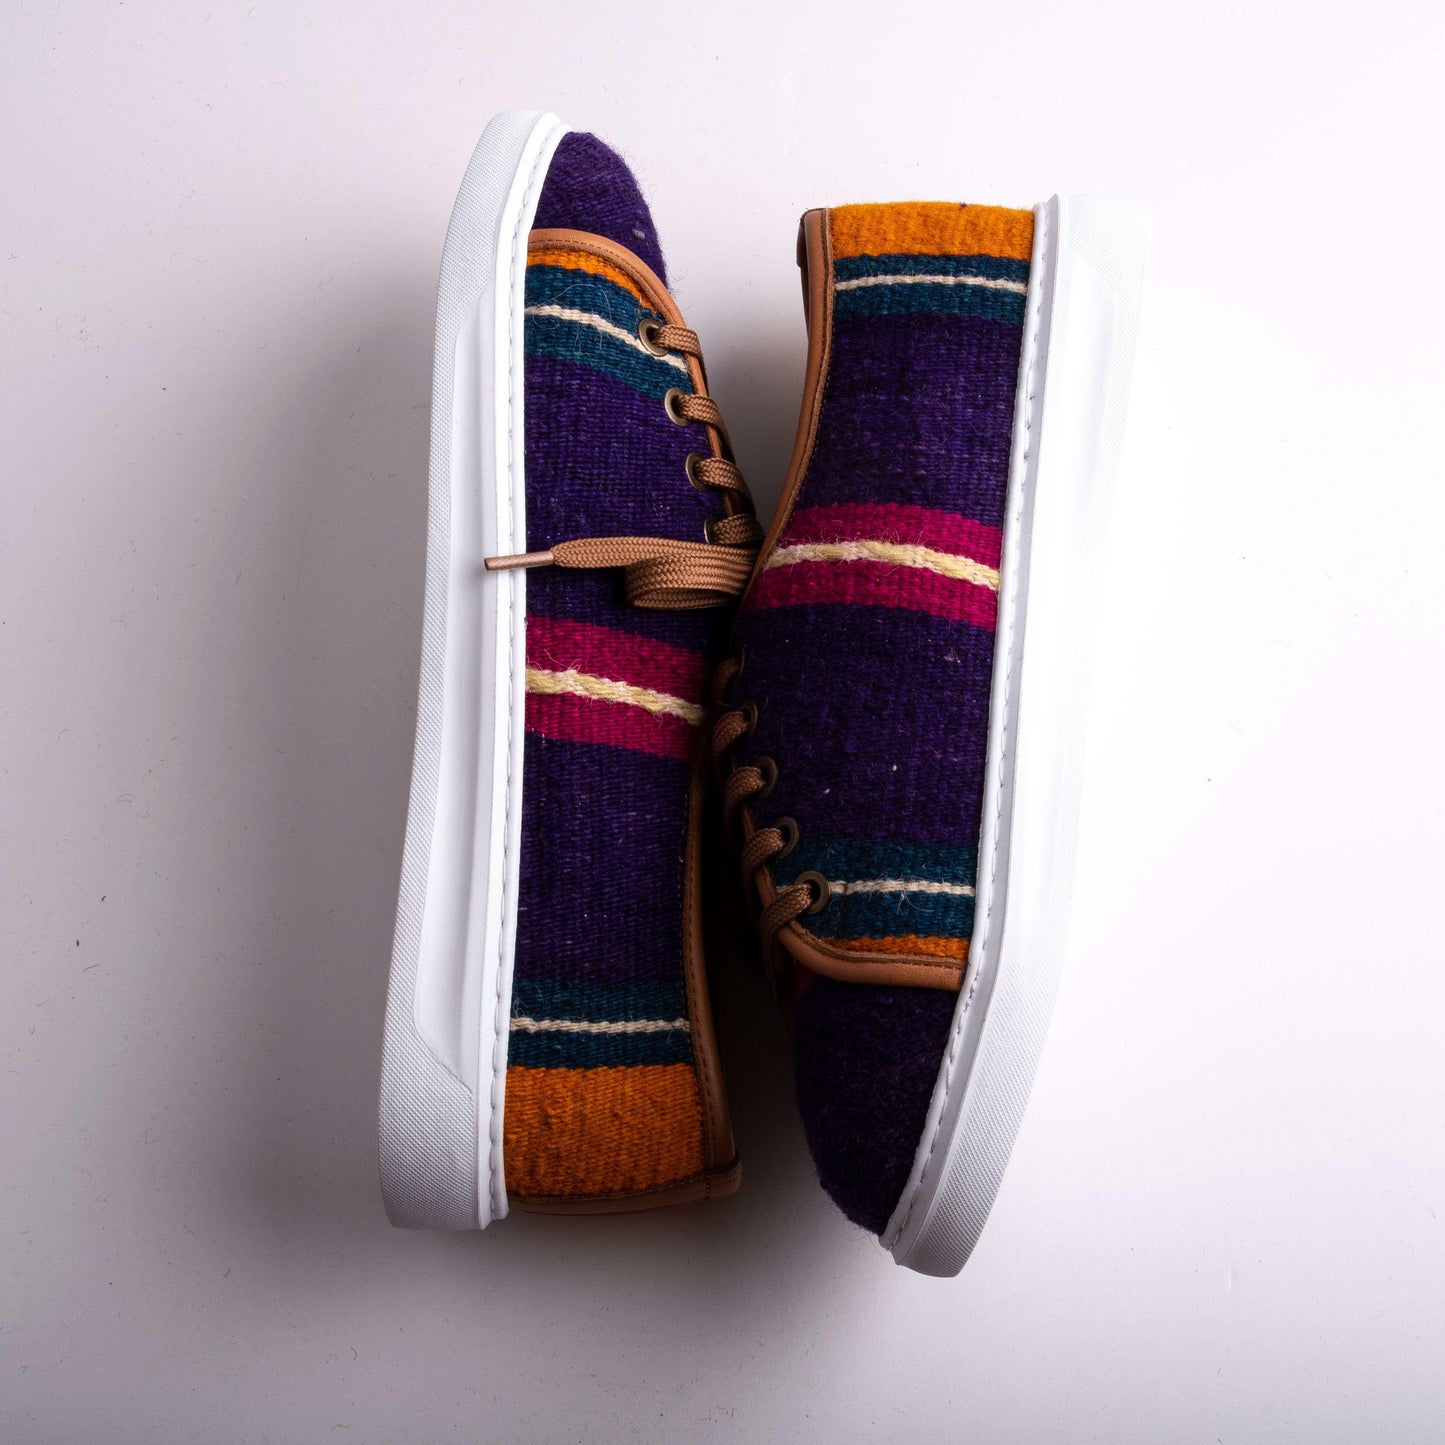 Ethnic Man Slip-On Shoes Crafted From Handmade Kilim and Real Leather Size 10 Base Width: 10 cm - Base Length: 30,5 cm